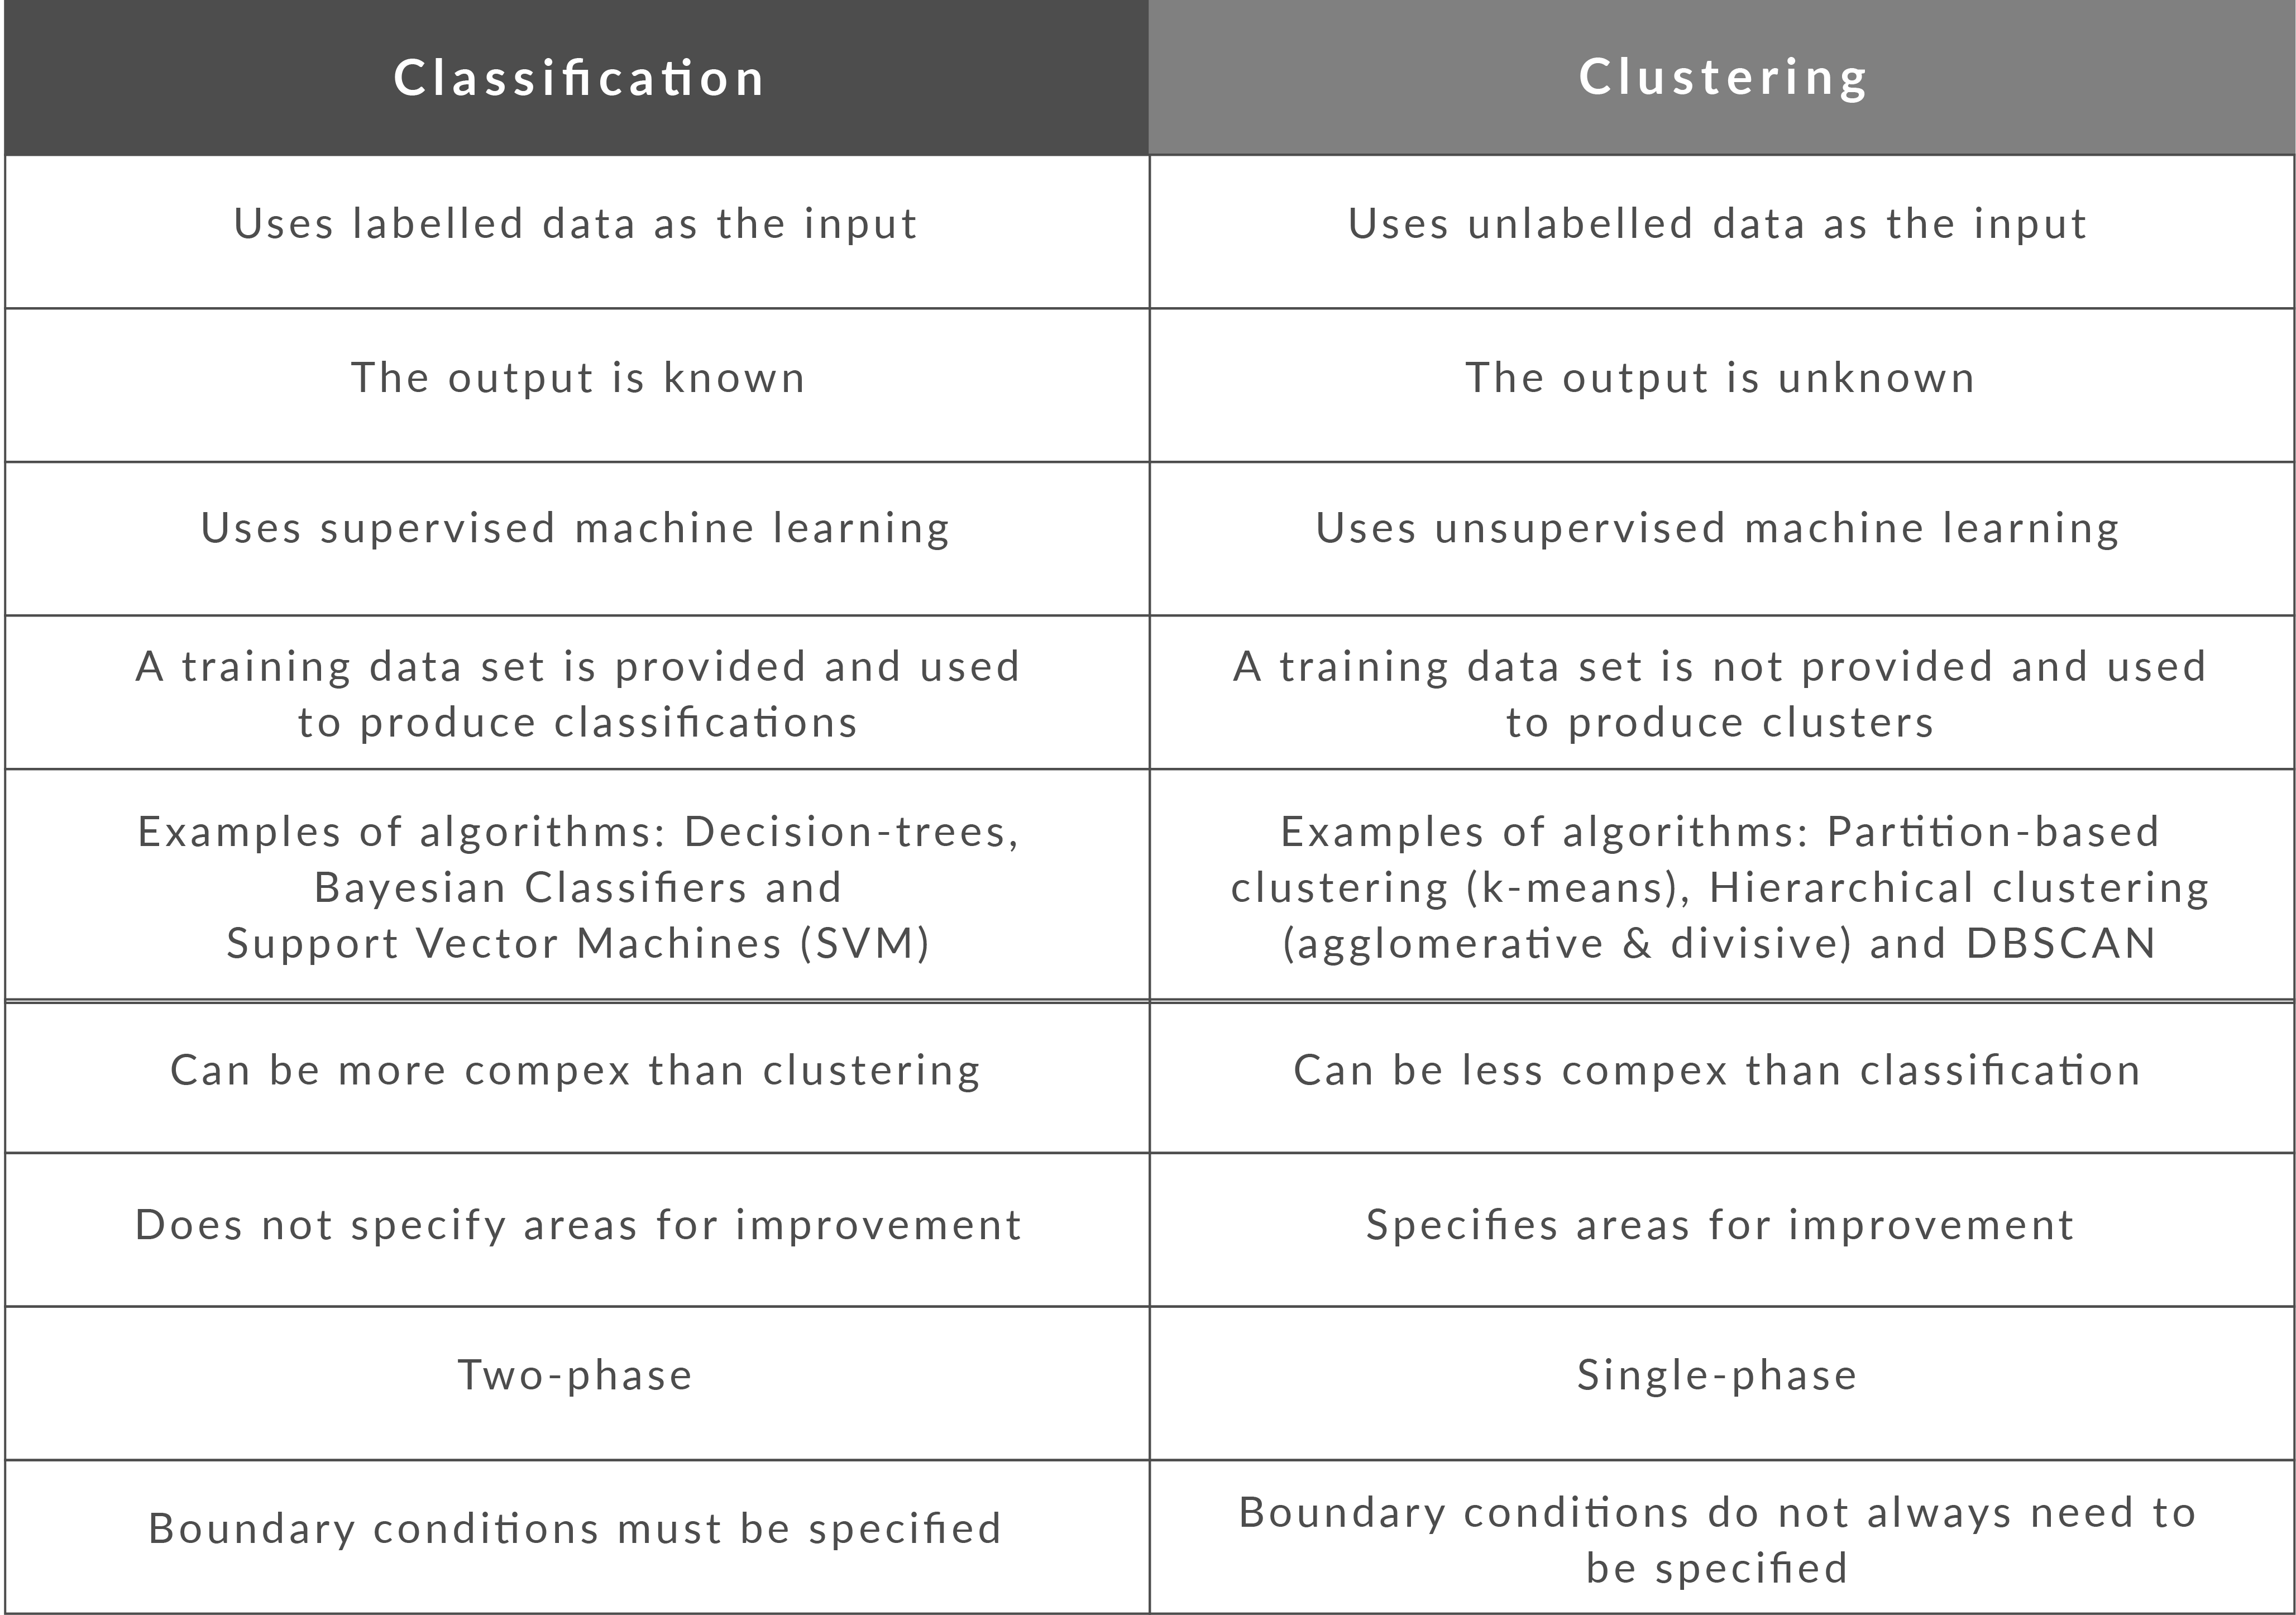 What are two 2 differences between classification and clustering?